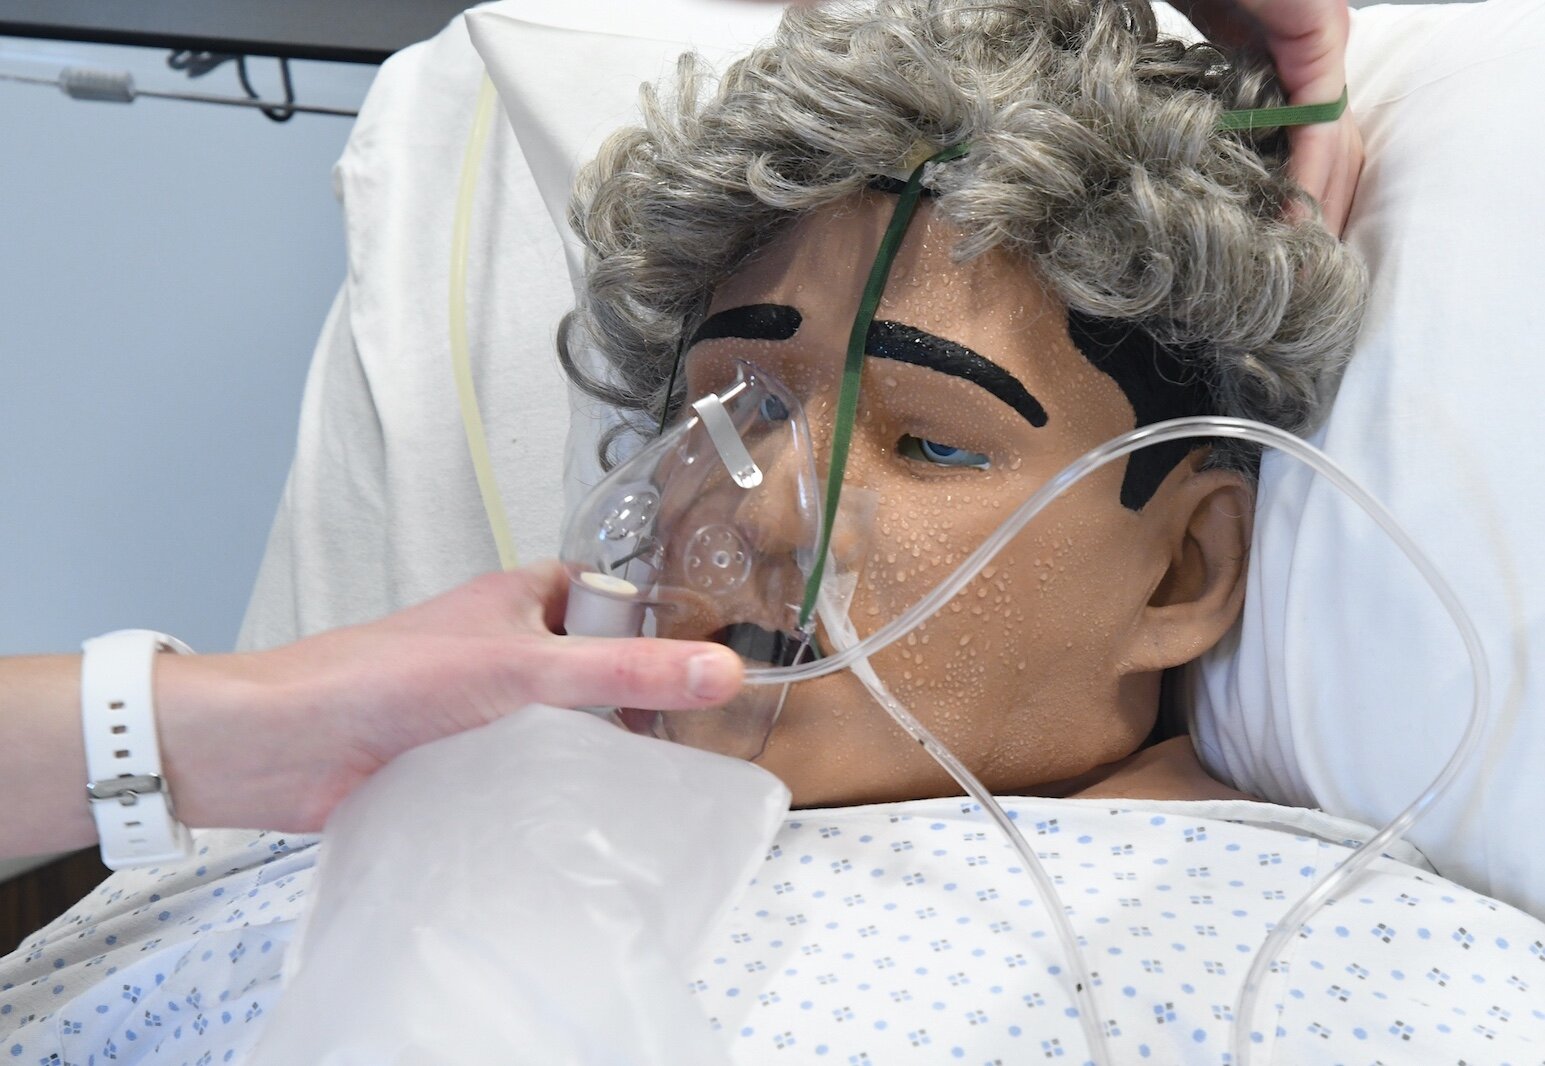 Caleb Vander Weide, a Kellogg Community College nursing student, adjusts the oxygen mask of a patient in the college’s sim lab.